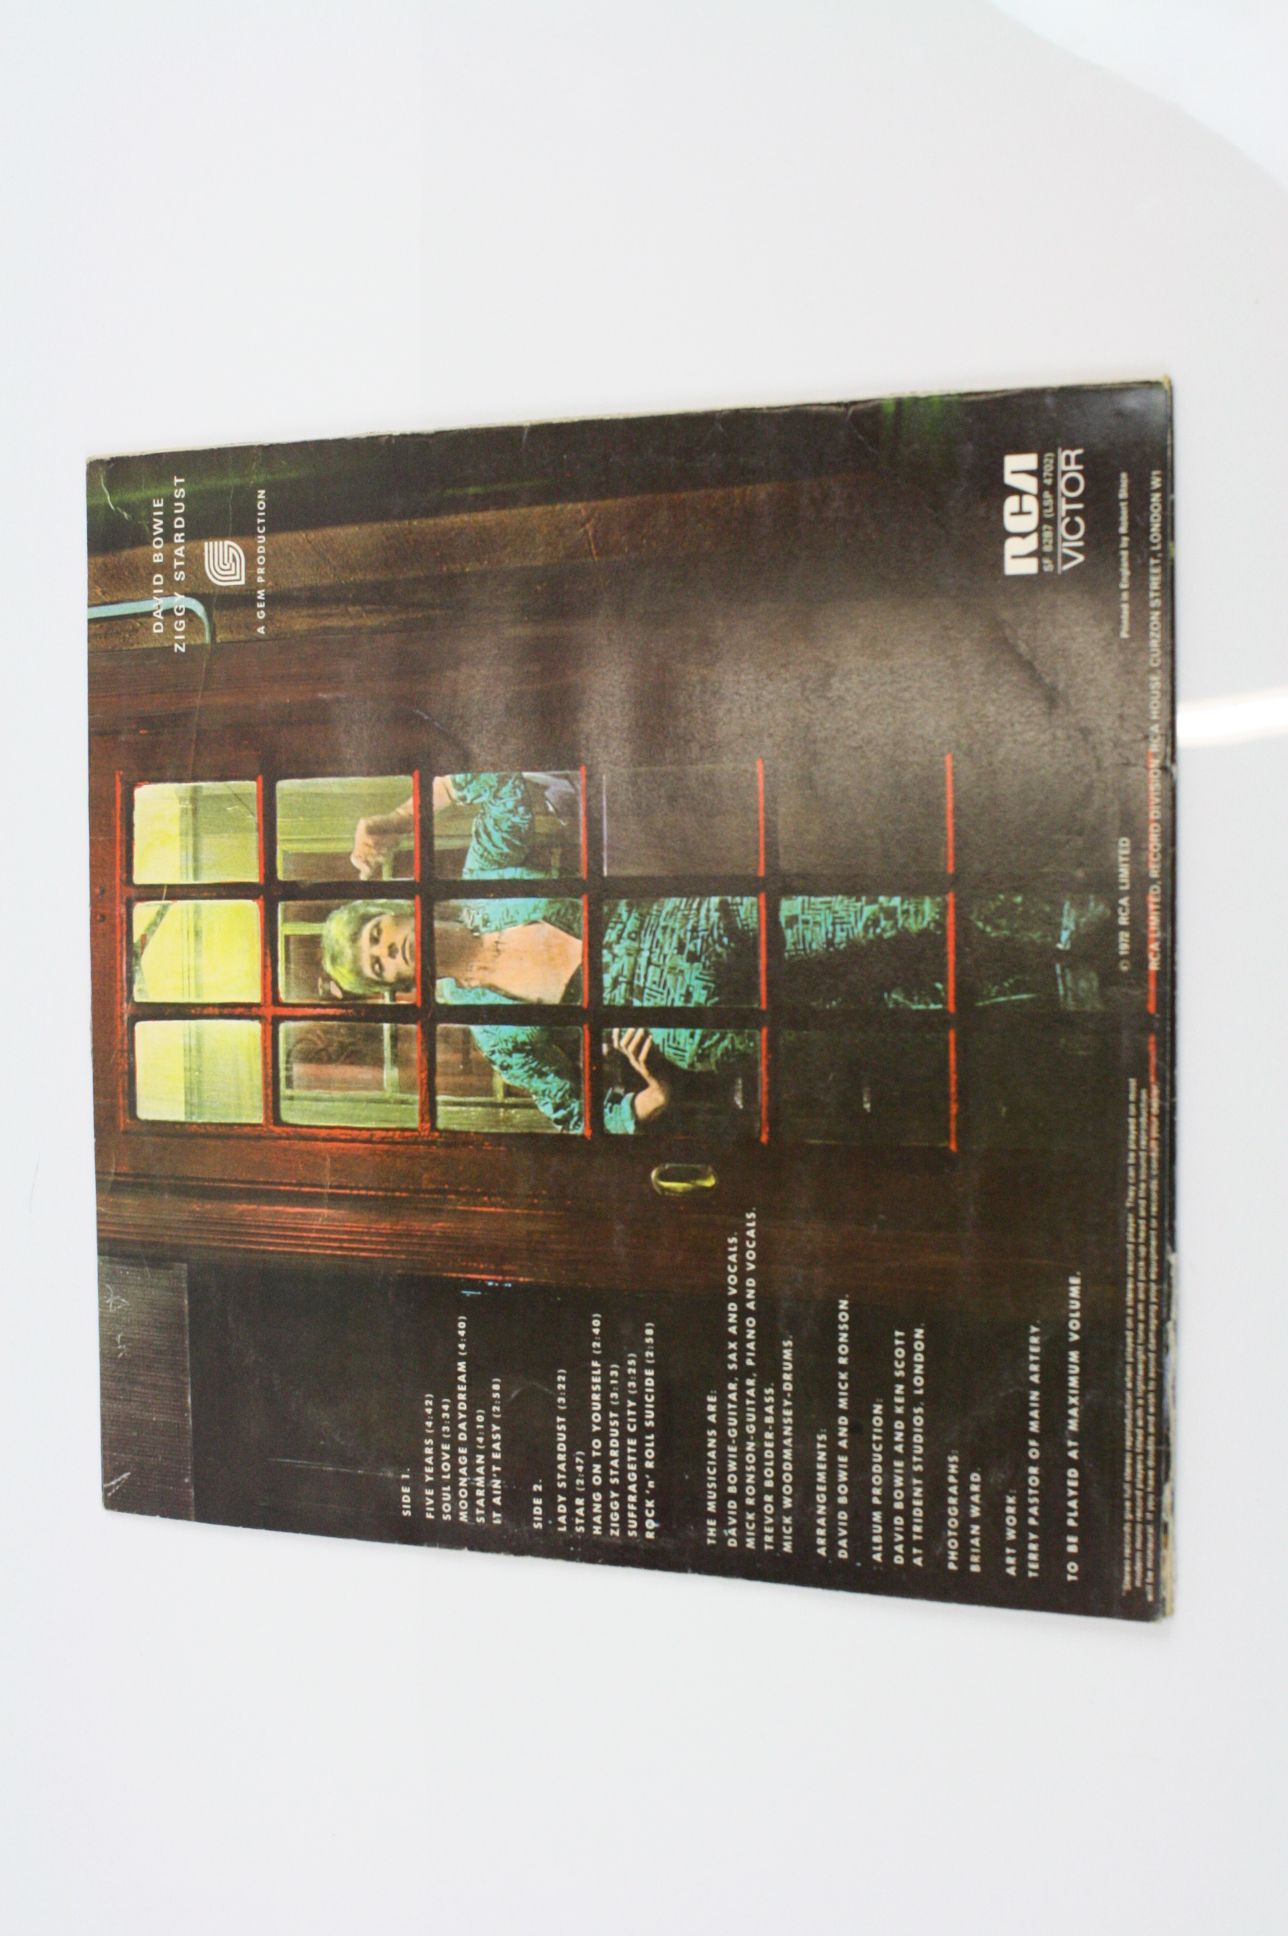 Vinyl - David Bowie Ziggy Stardust (SF 8287) early copy with Titanic / Chrysalis Music credits to - Image 9 of 10